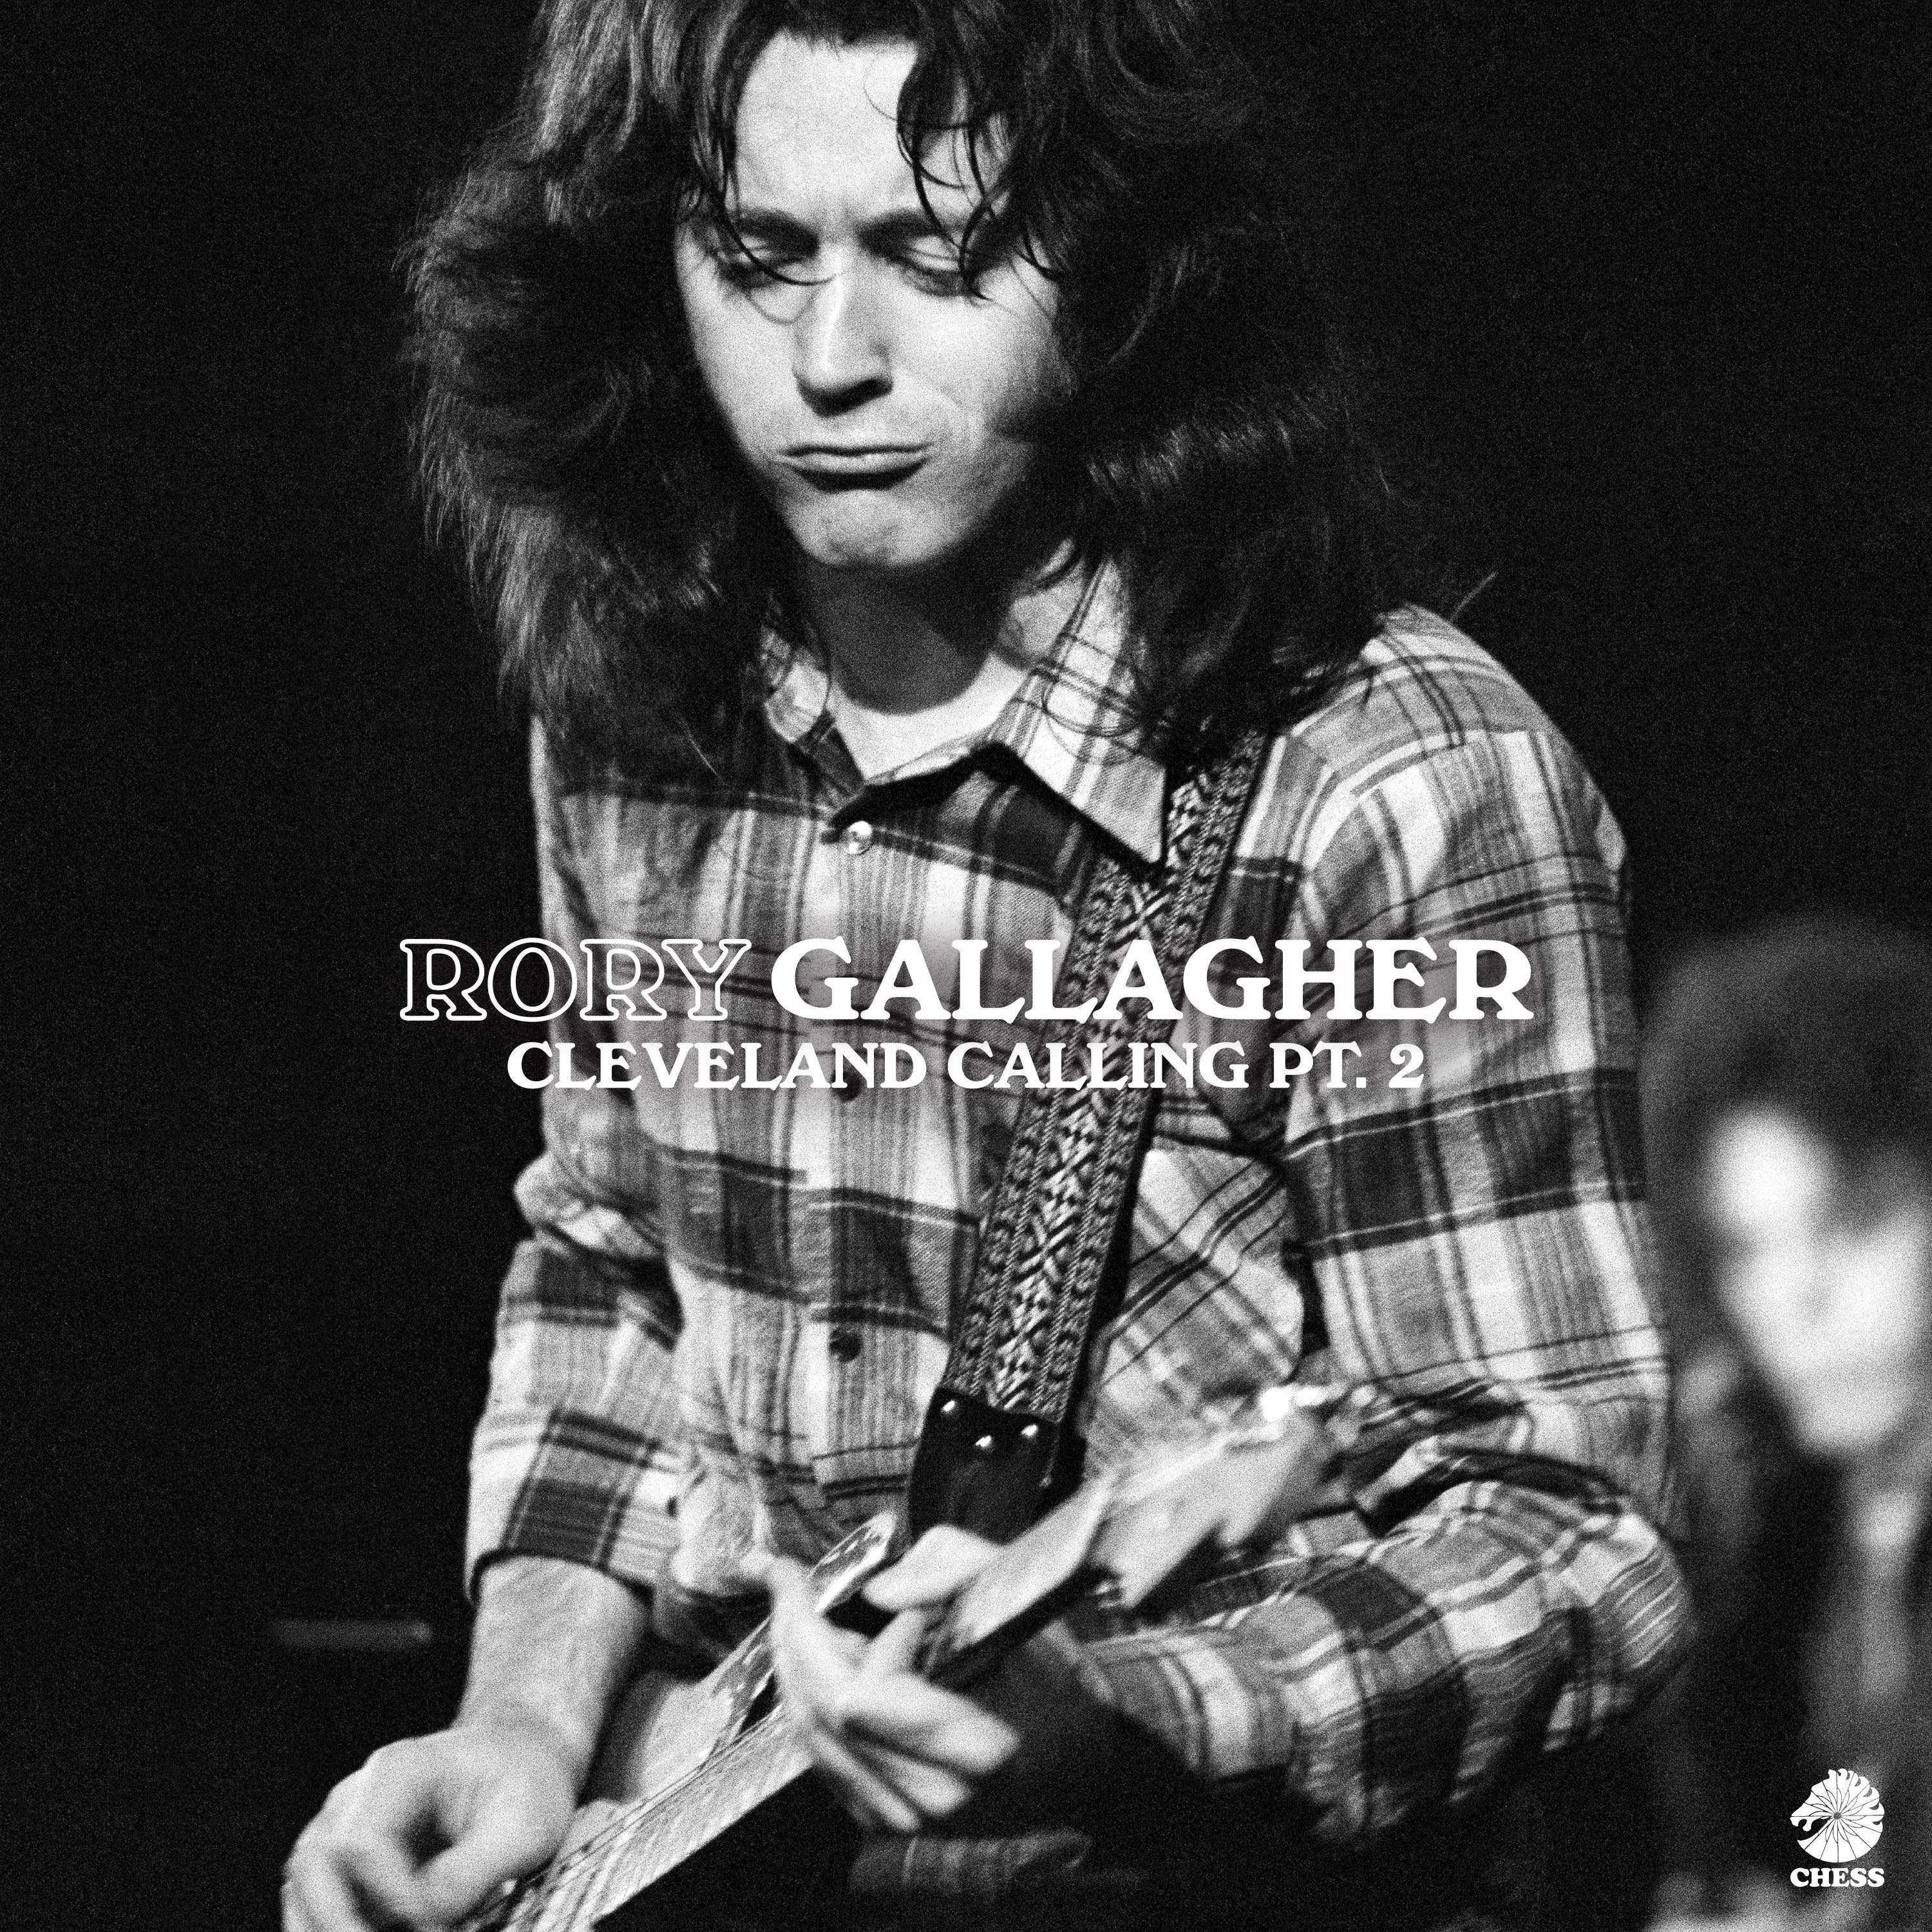 Rory Gallagher - Cleveland Calling Pt. 2 (RSD 2021 LP)